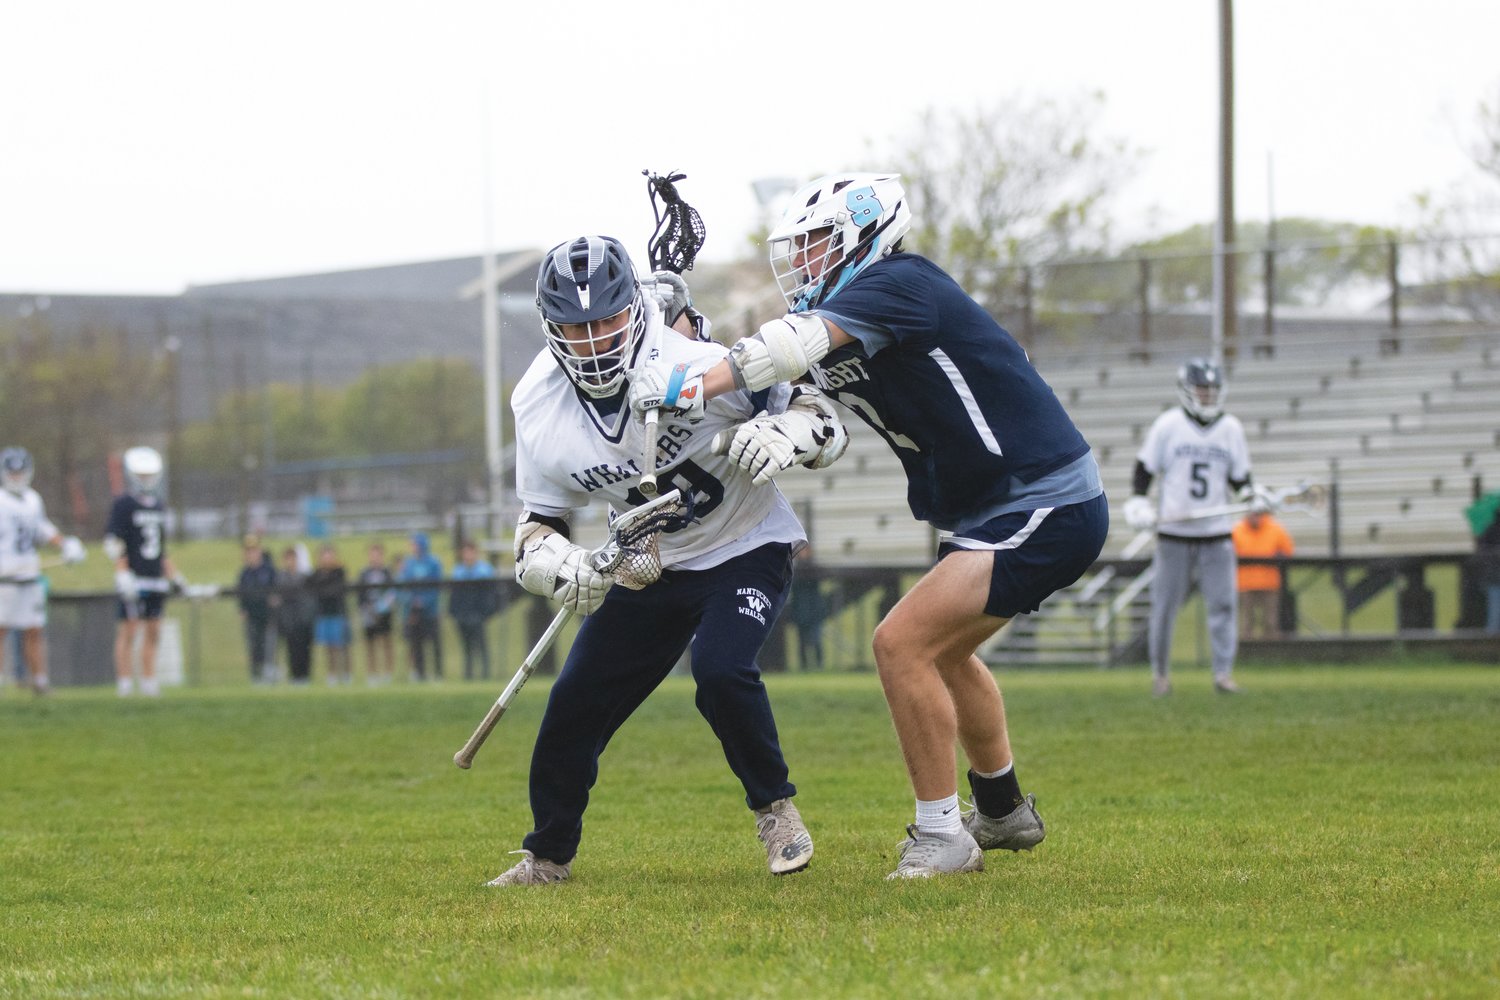 Boys lacrosse drops two games against tough competition - The Inquirer and Mirror